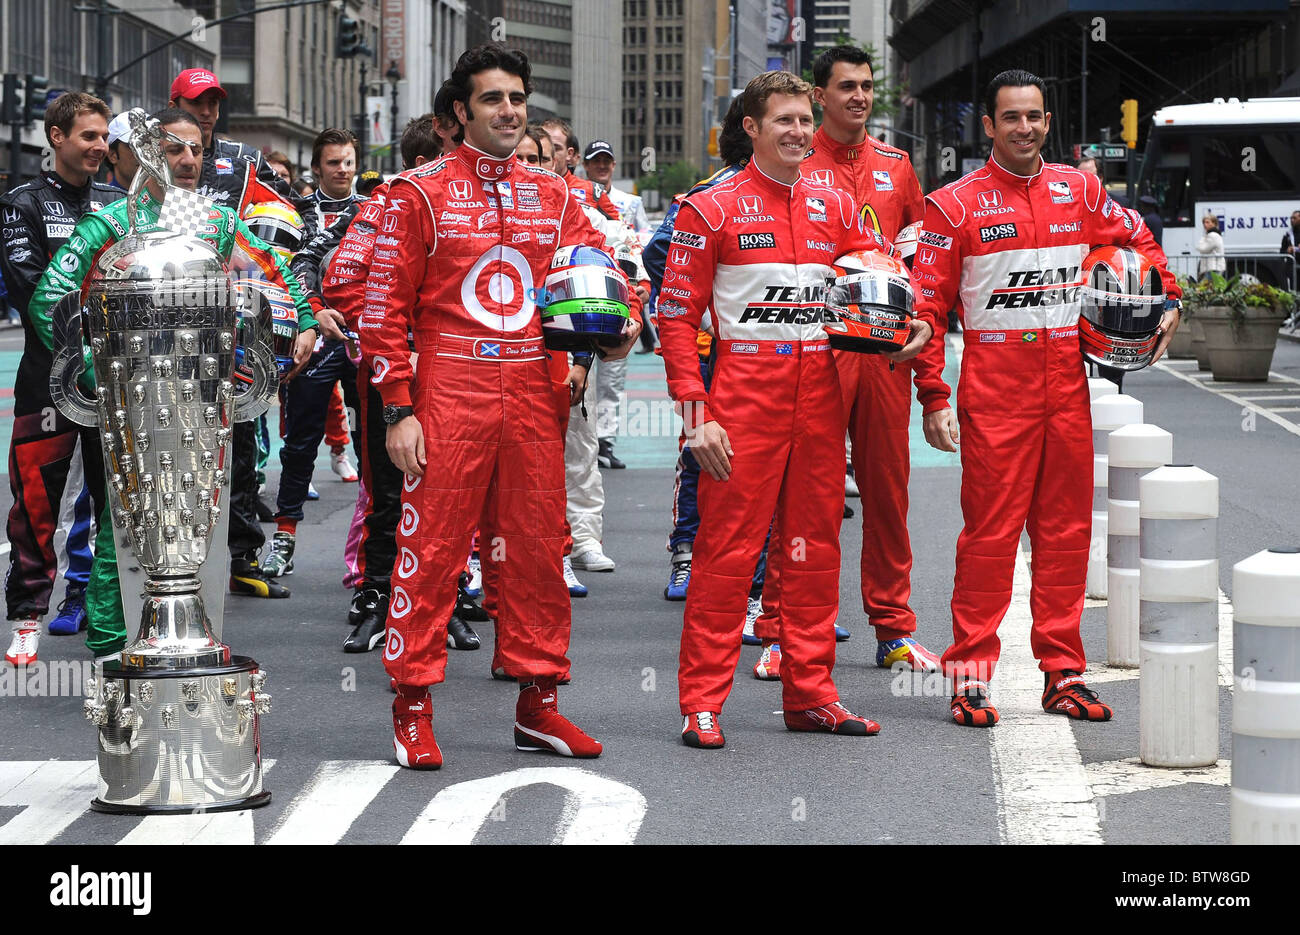 The 2009 Indianapolis 500 Race Car Drivers Line-Up Stock Photo